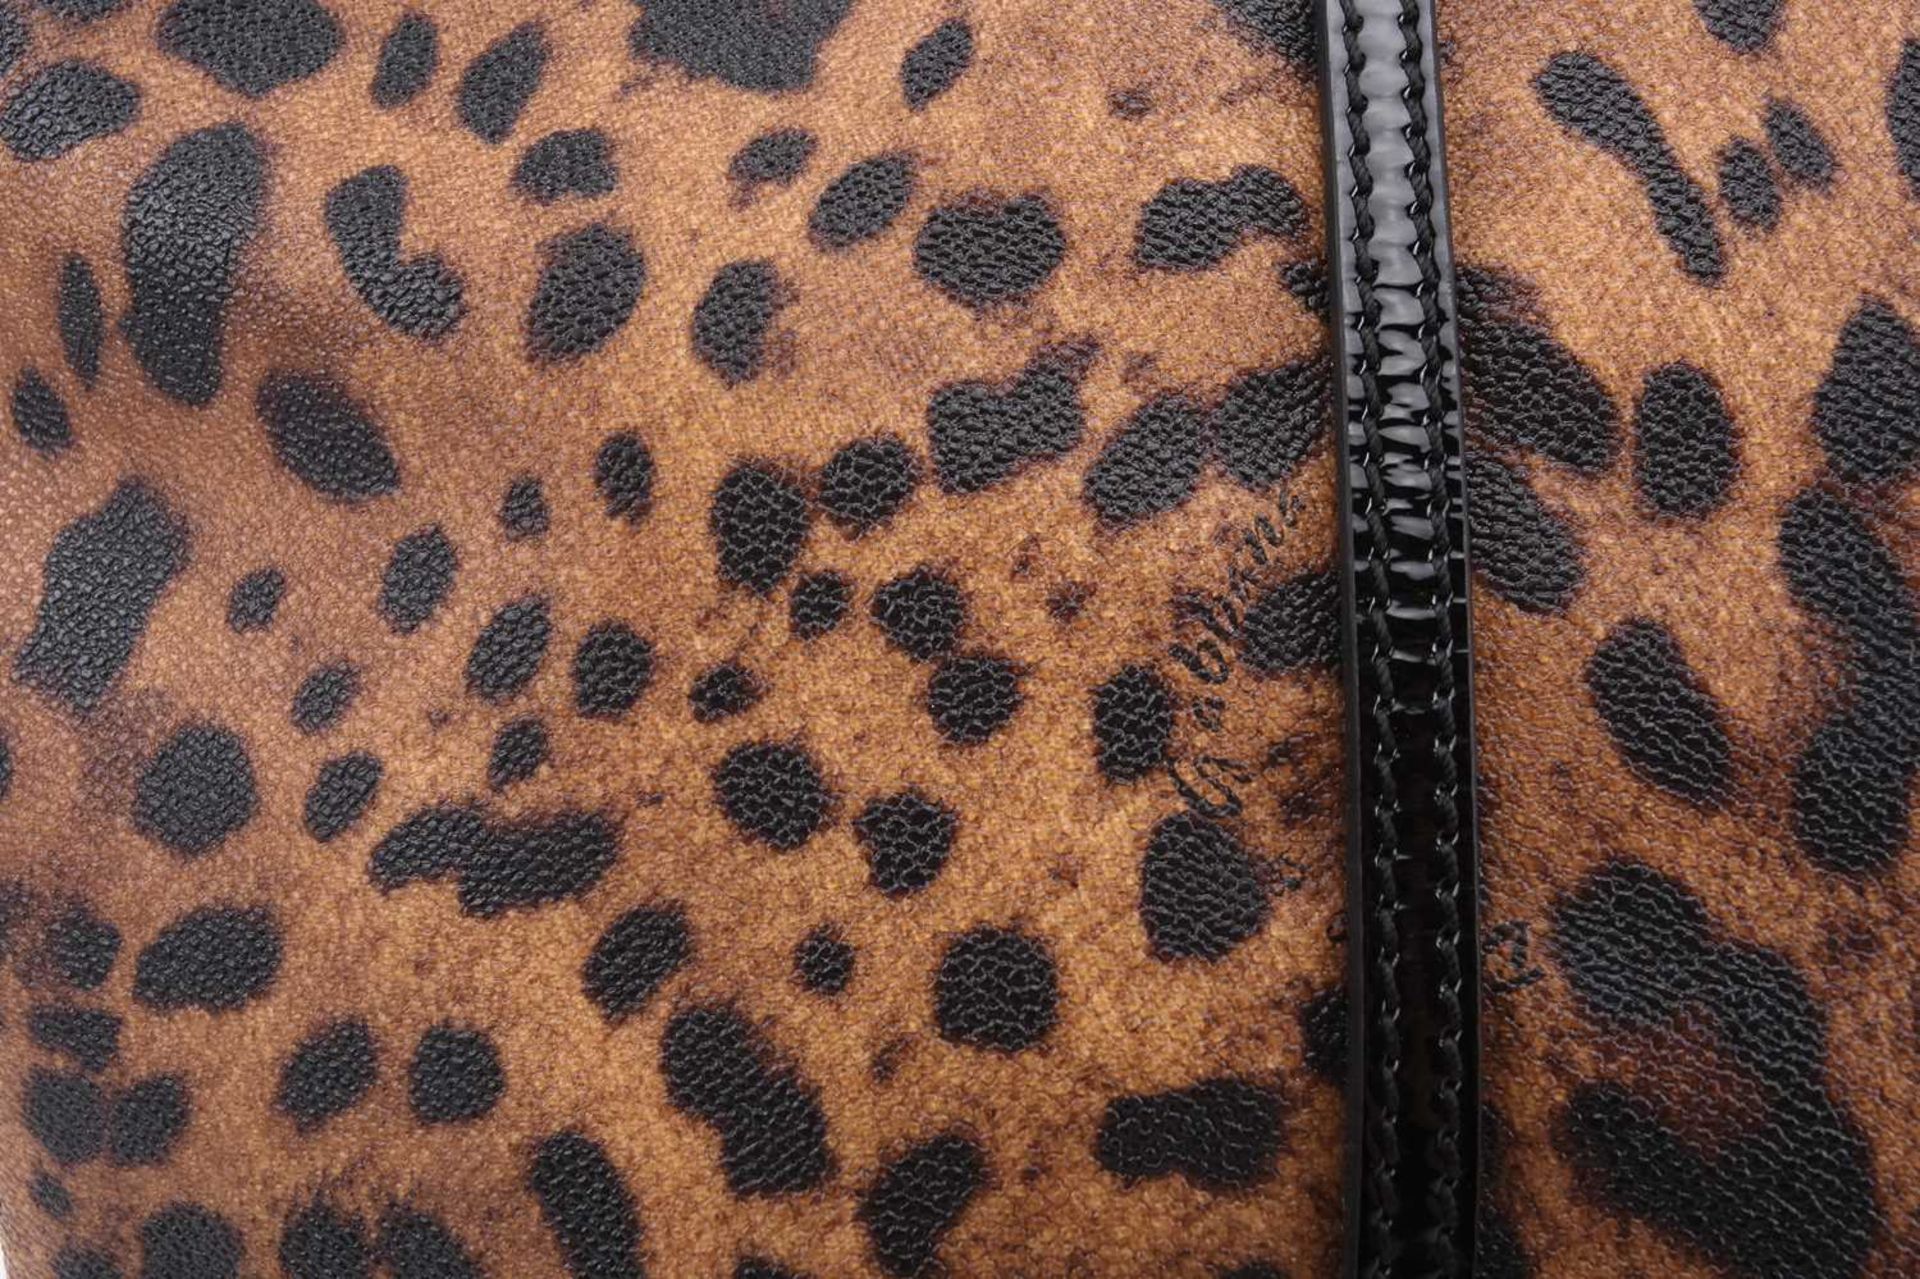 Dolce & Gabbana - a large leopard print 'Escape' shopper tote with black patent leather trims and - Image 9 of 13